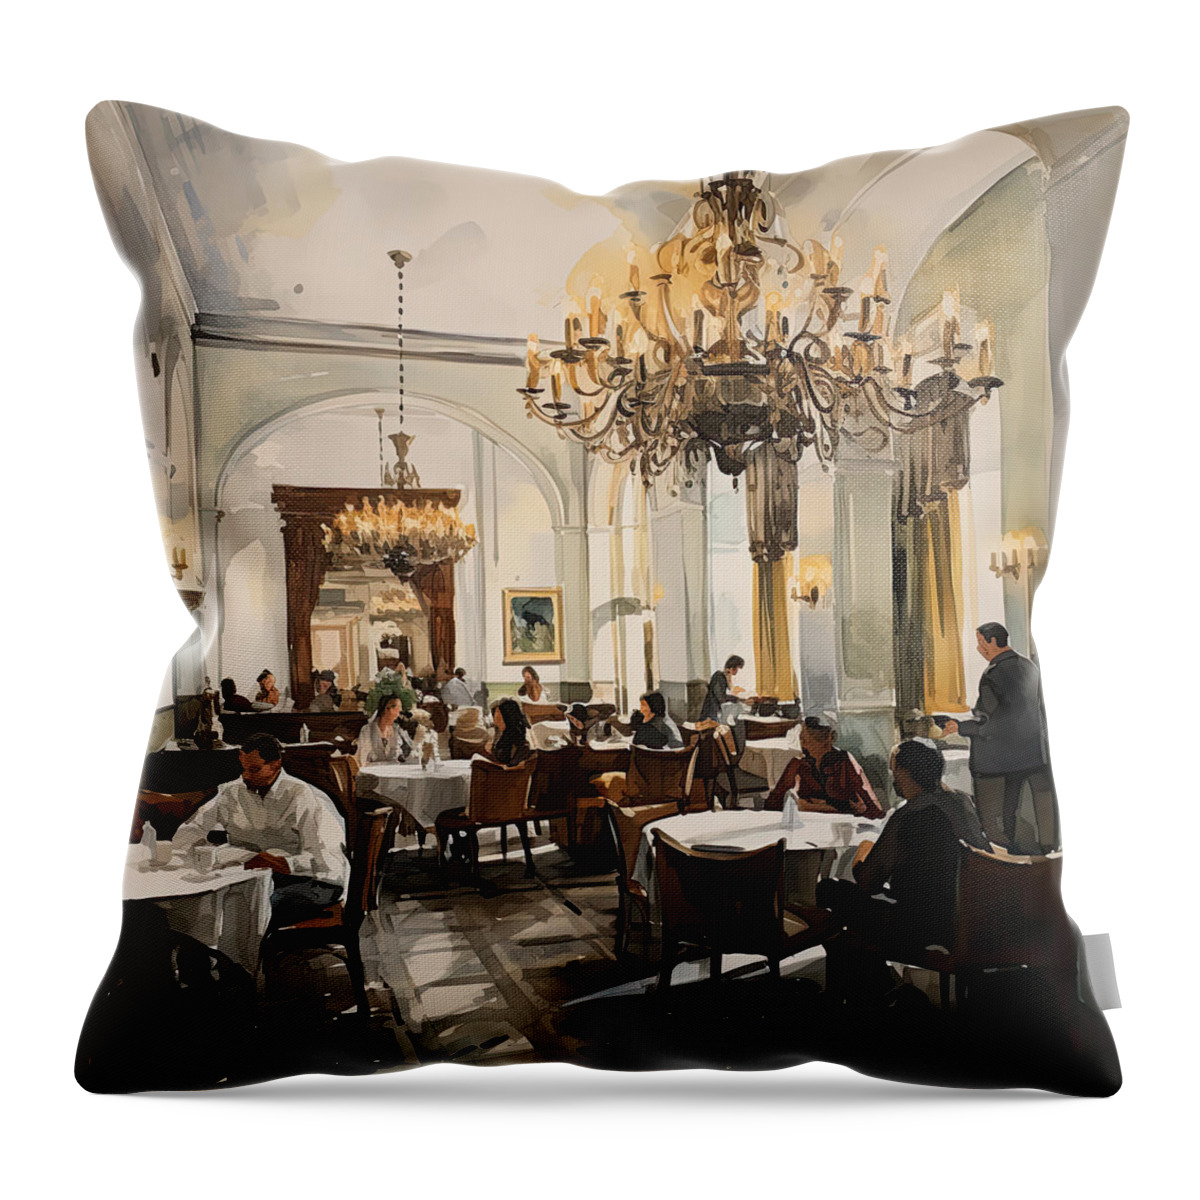 Venetian Dining Room Throw Pillow featuring the painting Venetian Dining Room - A Taste of History and Luxury in Hot Springs by Lourry Legarde